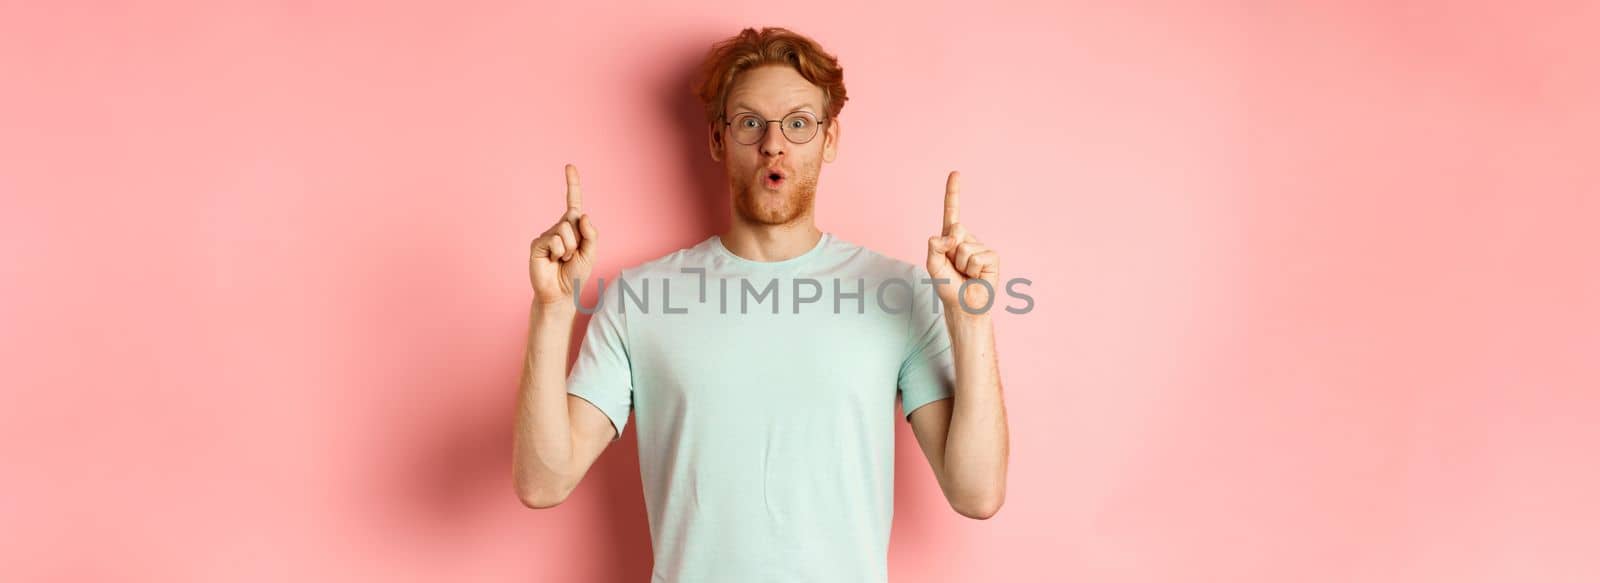 Impressed caucasian man with ginger hair, wearing glasses and t-shirt, saying wow and pointing fingers up at awesome deal, standing over pink background.